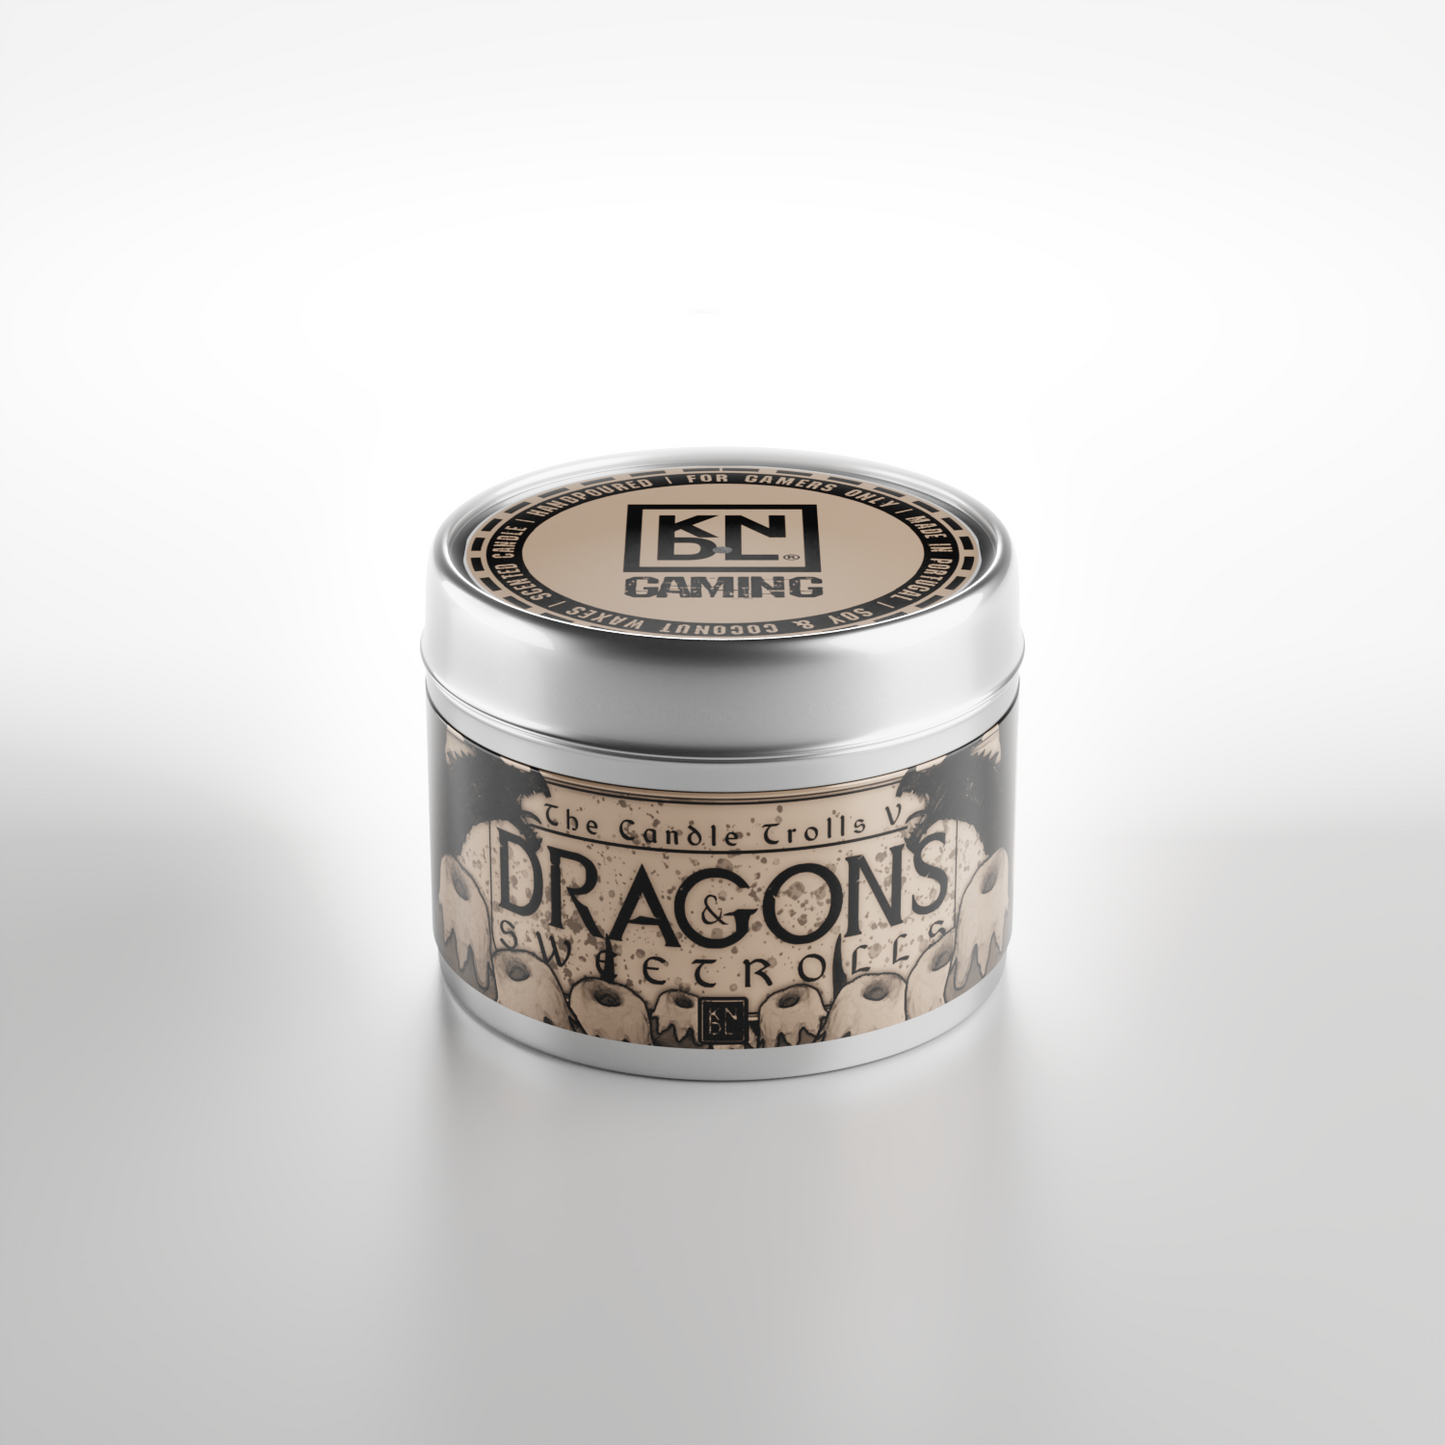 TIN NR 09 | DRAGONS & SWEETROLLS | SKYRIM INSPIRED SCENTED CANDLE